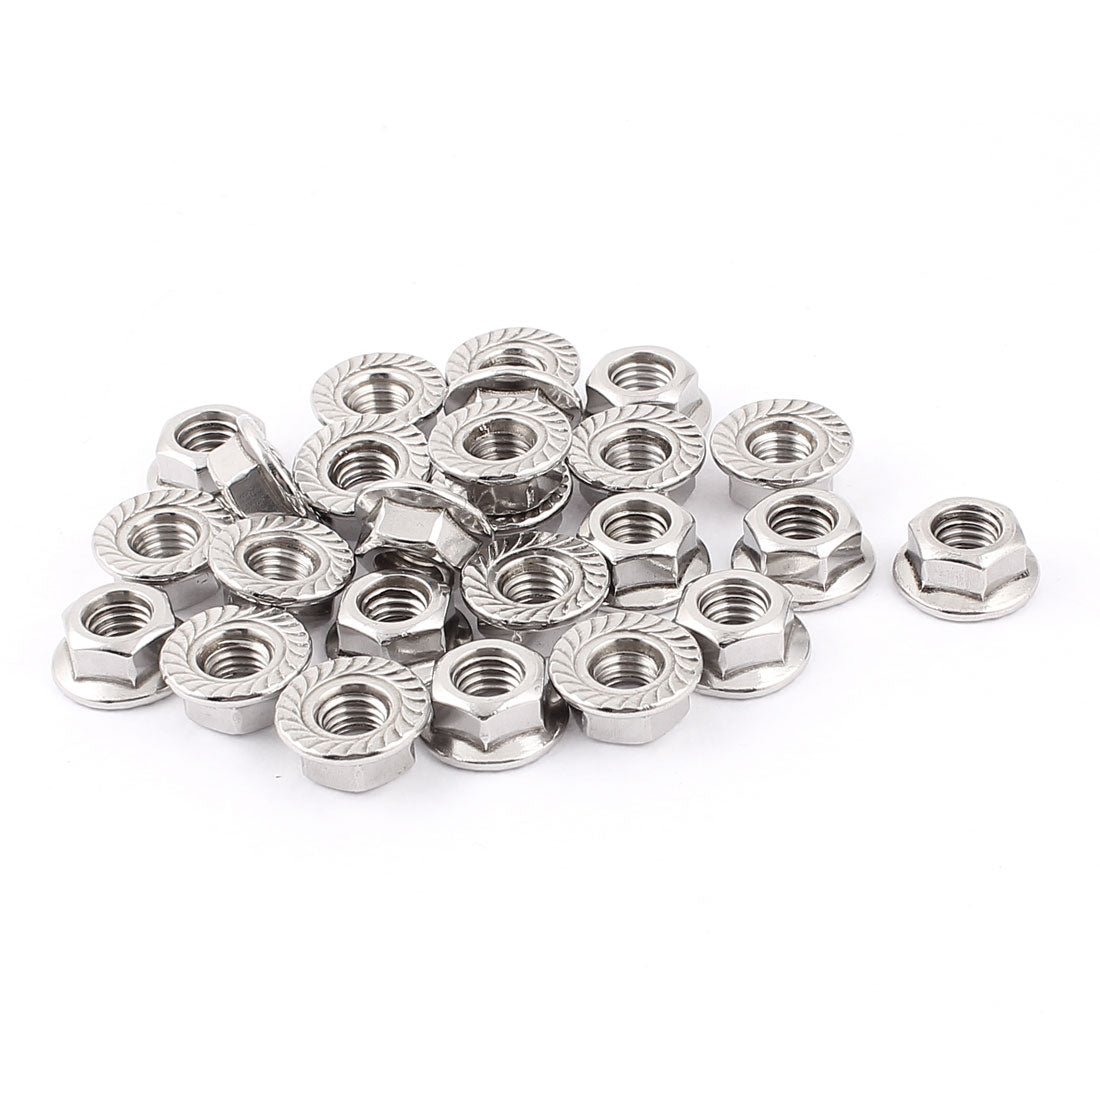 uxcell Uxcell 25PCS M8 Thread Diameter Stainless Steel Serrated Hex Flange Locknuts